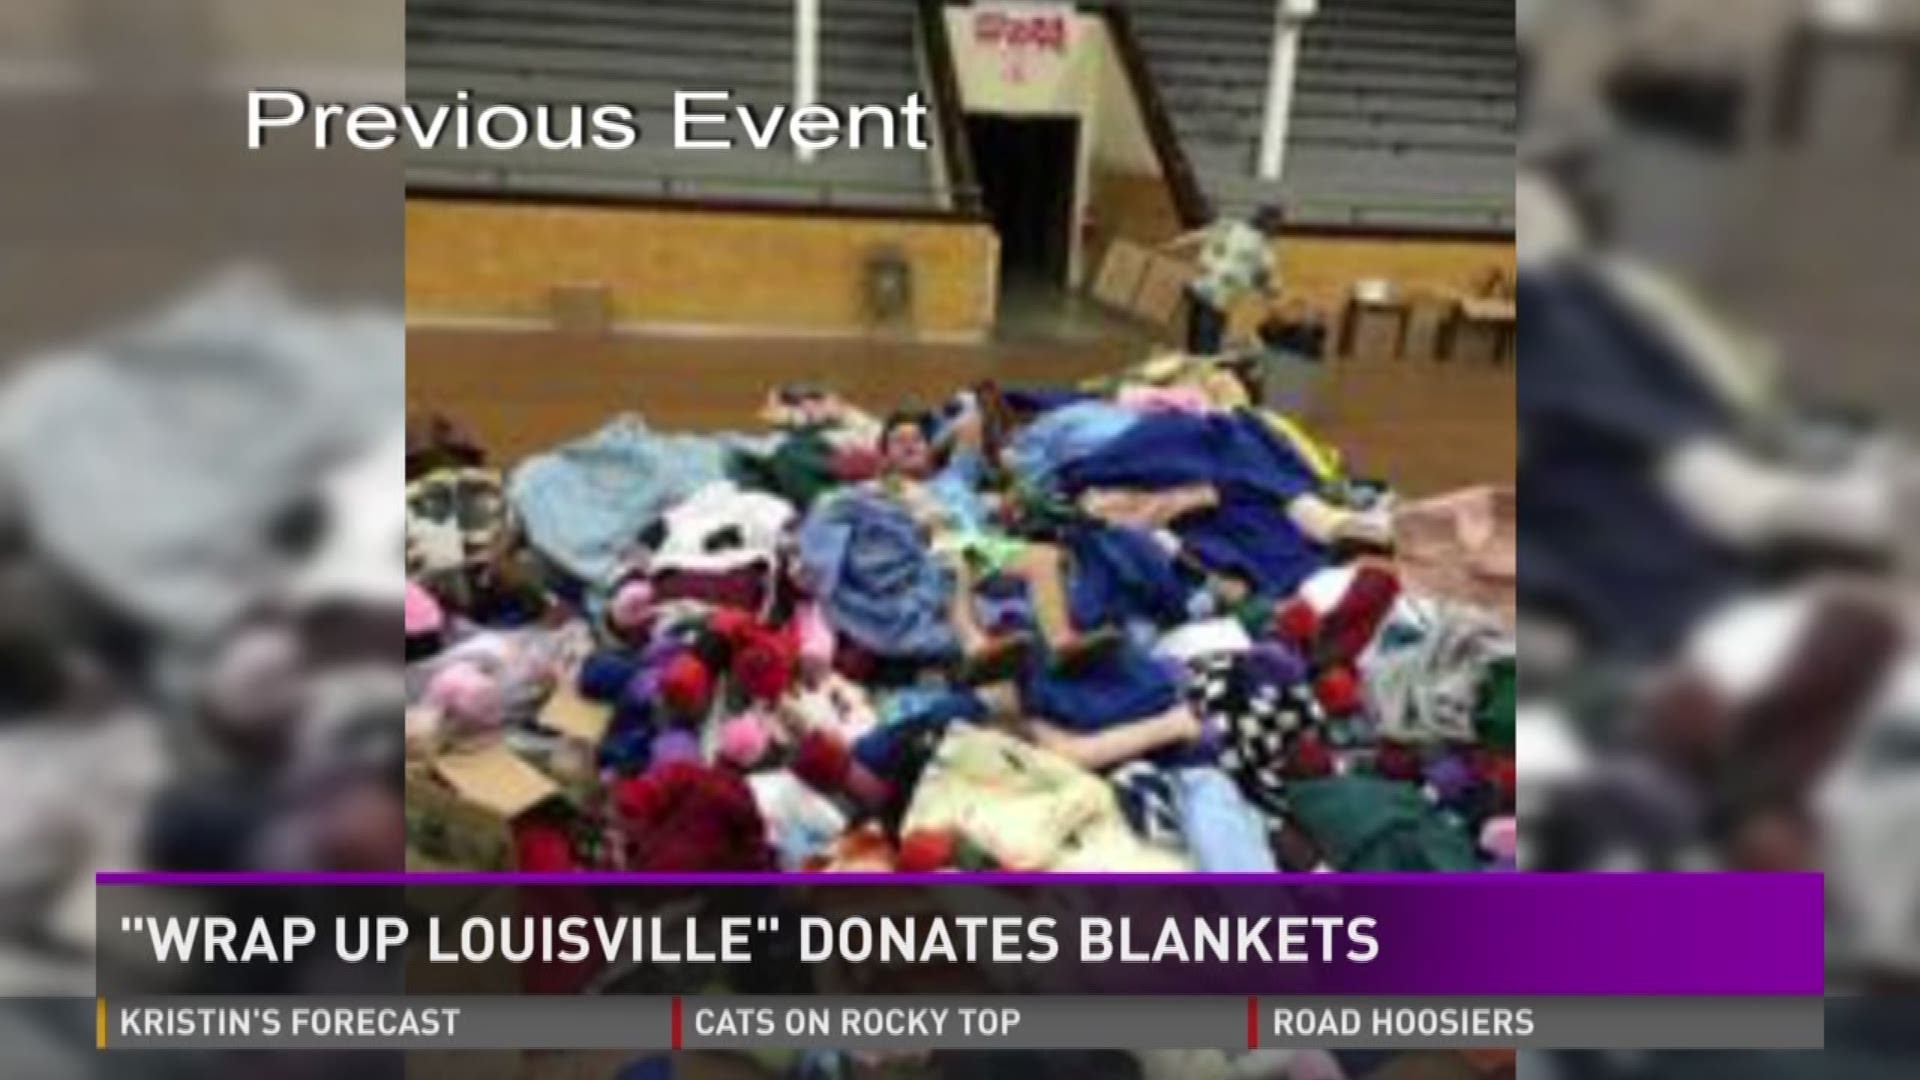 Salvation Army holds 7th annual Wrap Up Louisville blanket drive